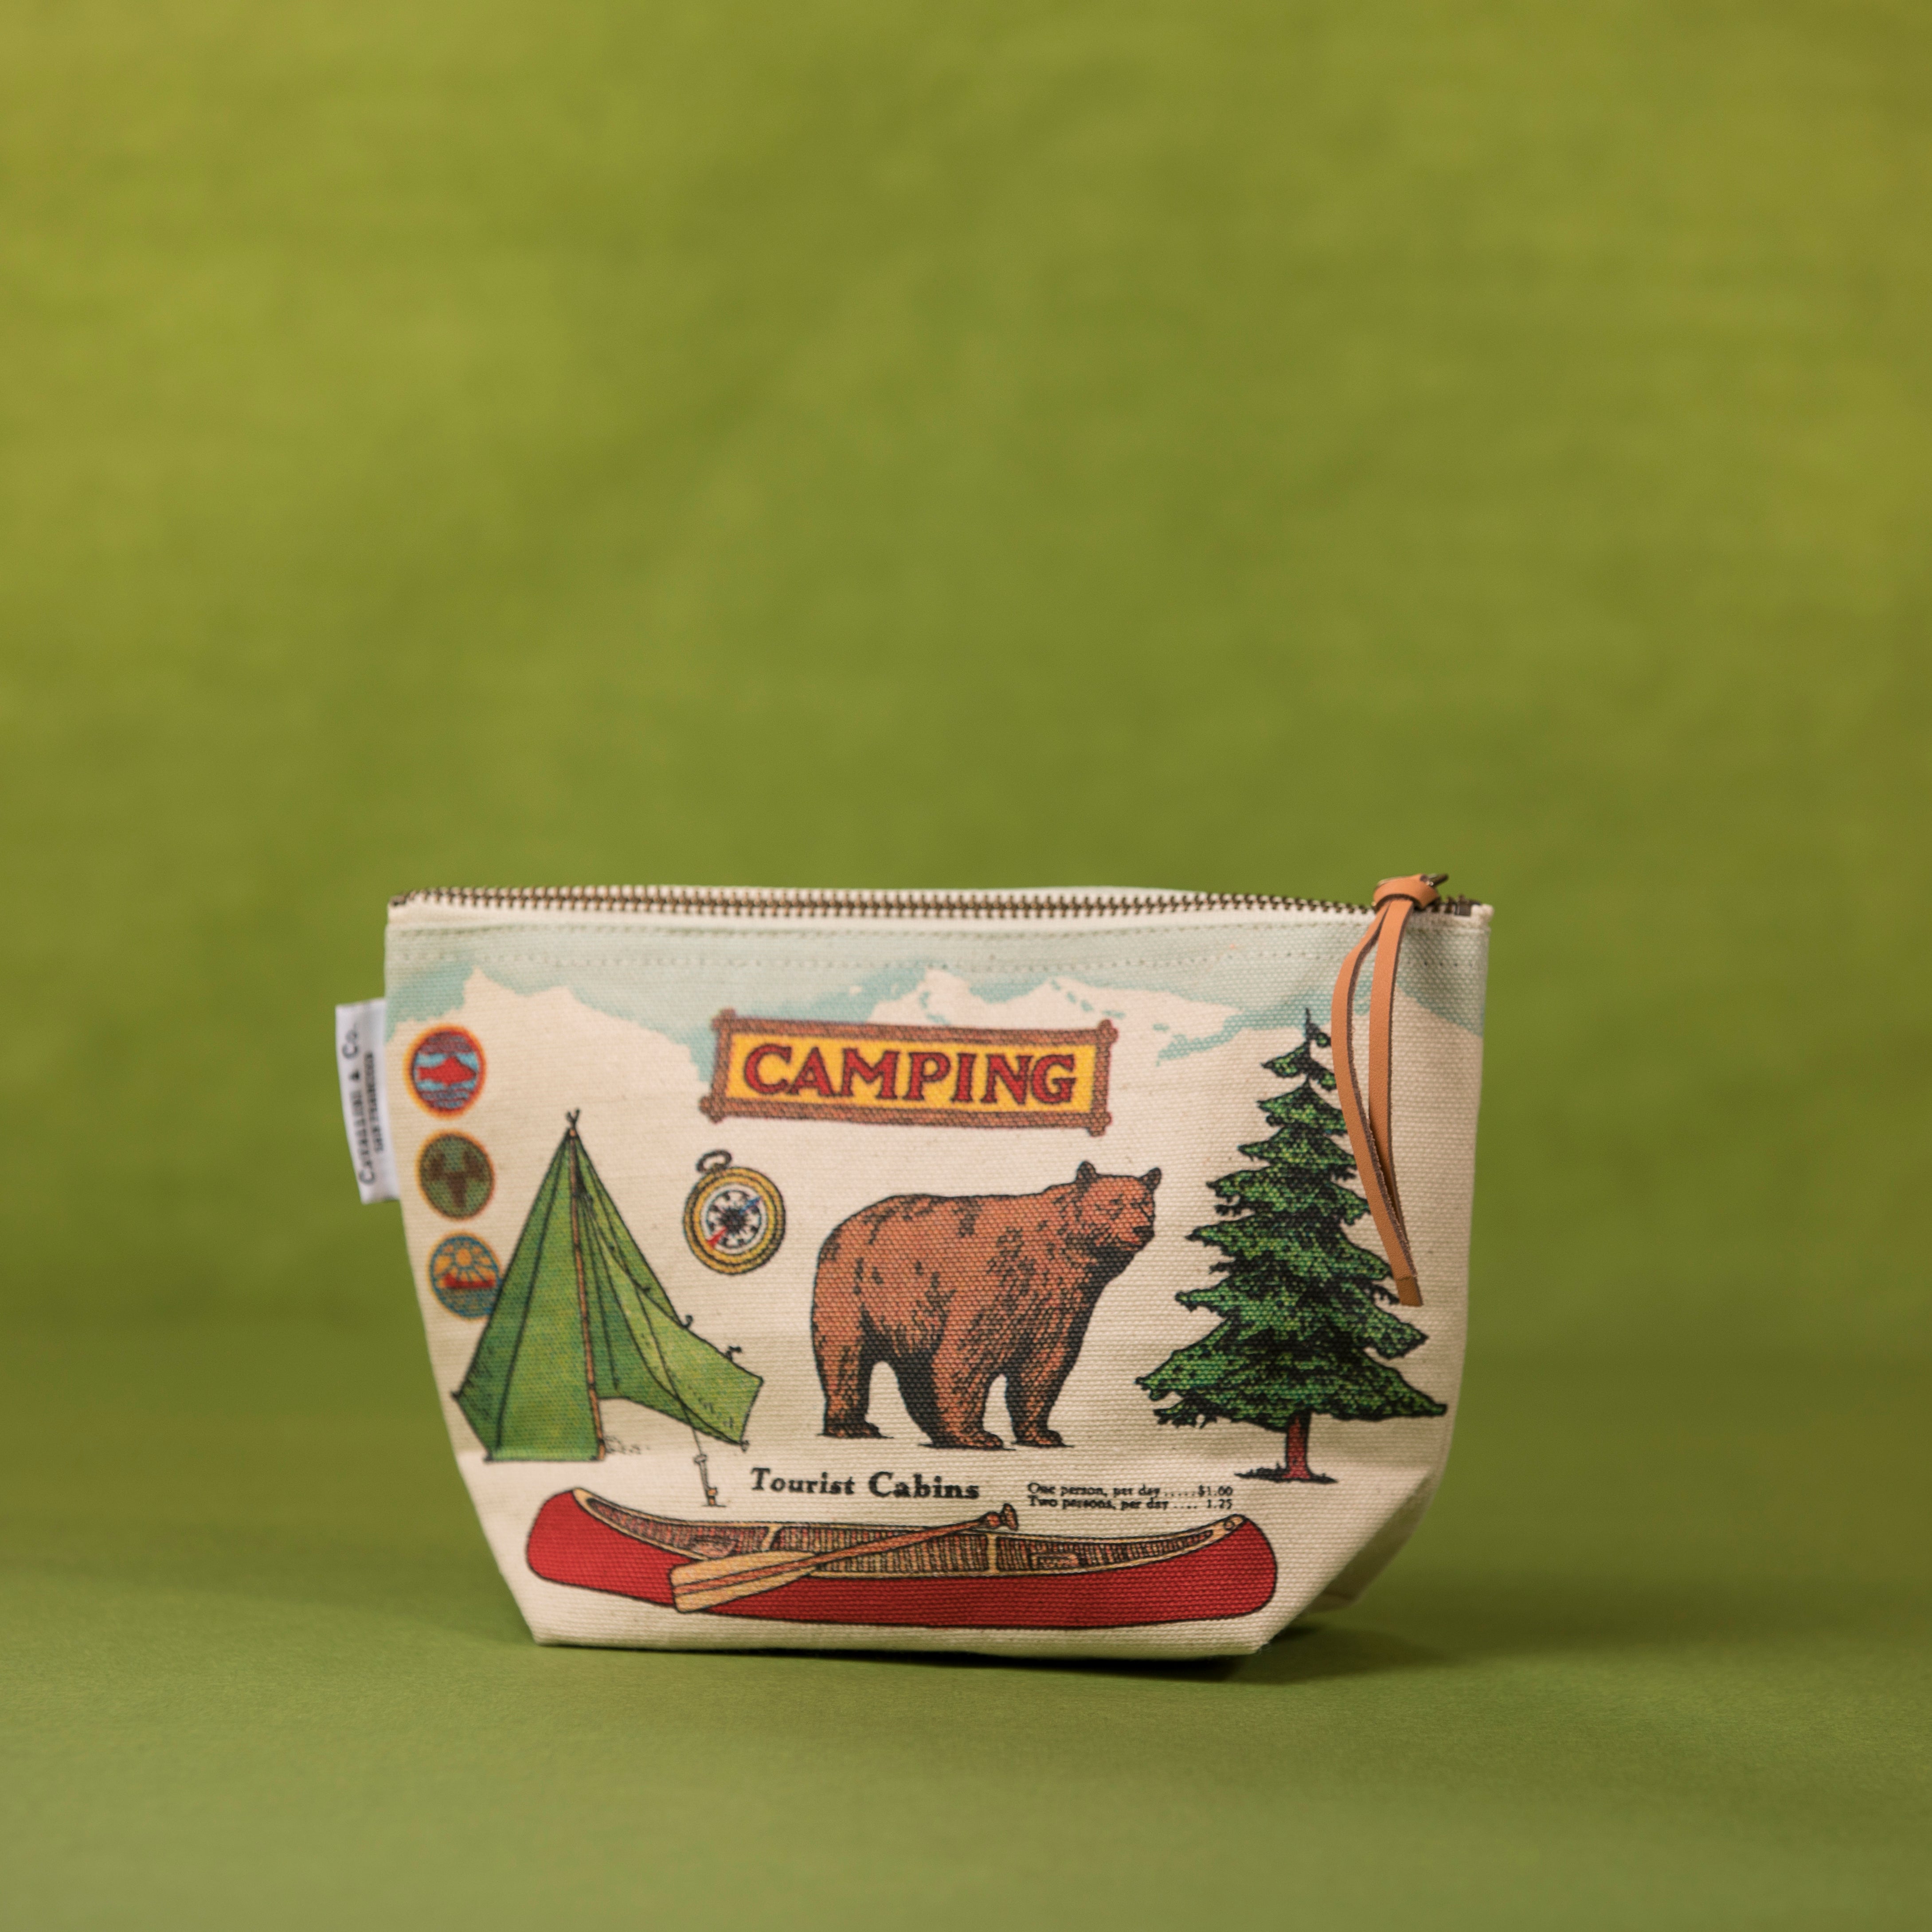 Cavallini Camping Pouch - Pouch - Gift - Women's Clothing Store - Women's Accessories - Ladies Boutique - O KOO RAN - Big Bear Lake California